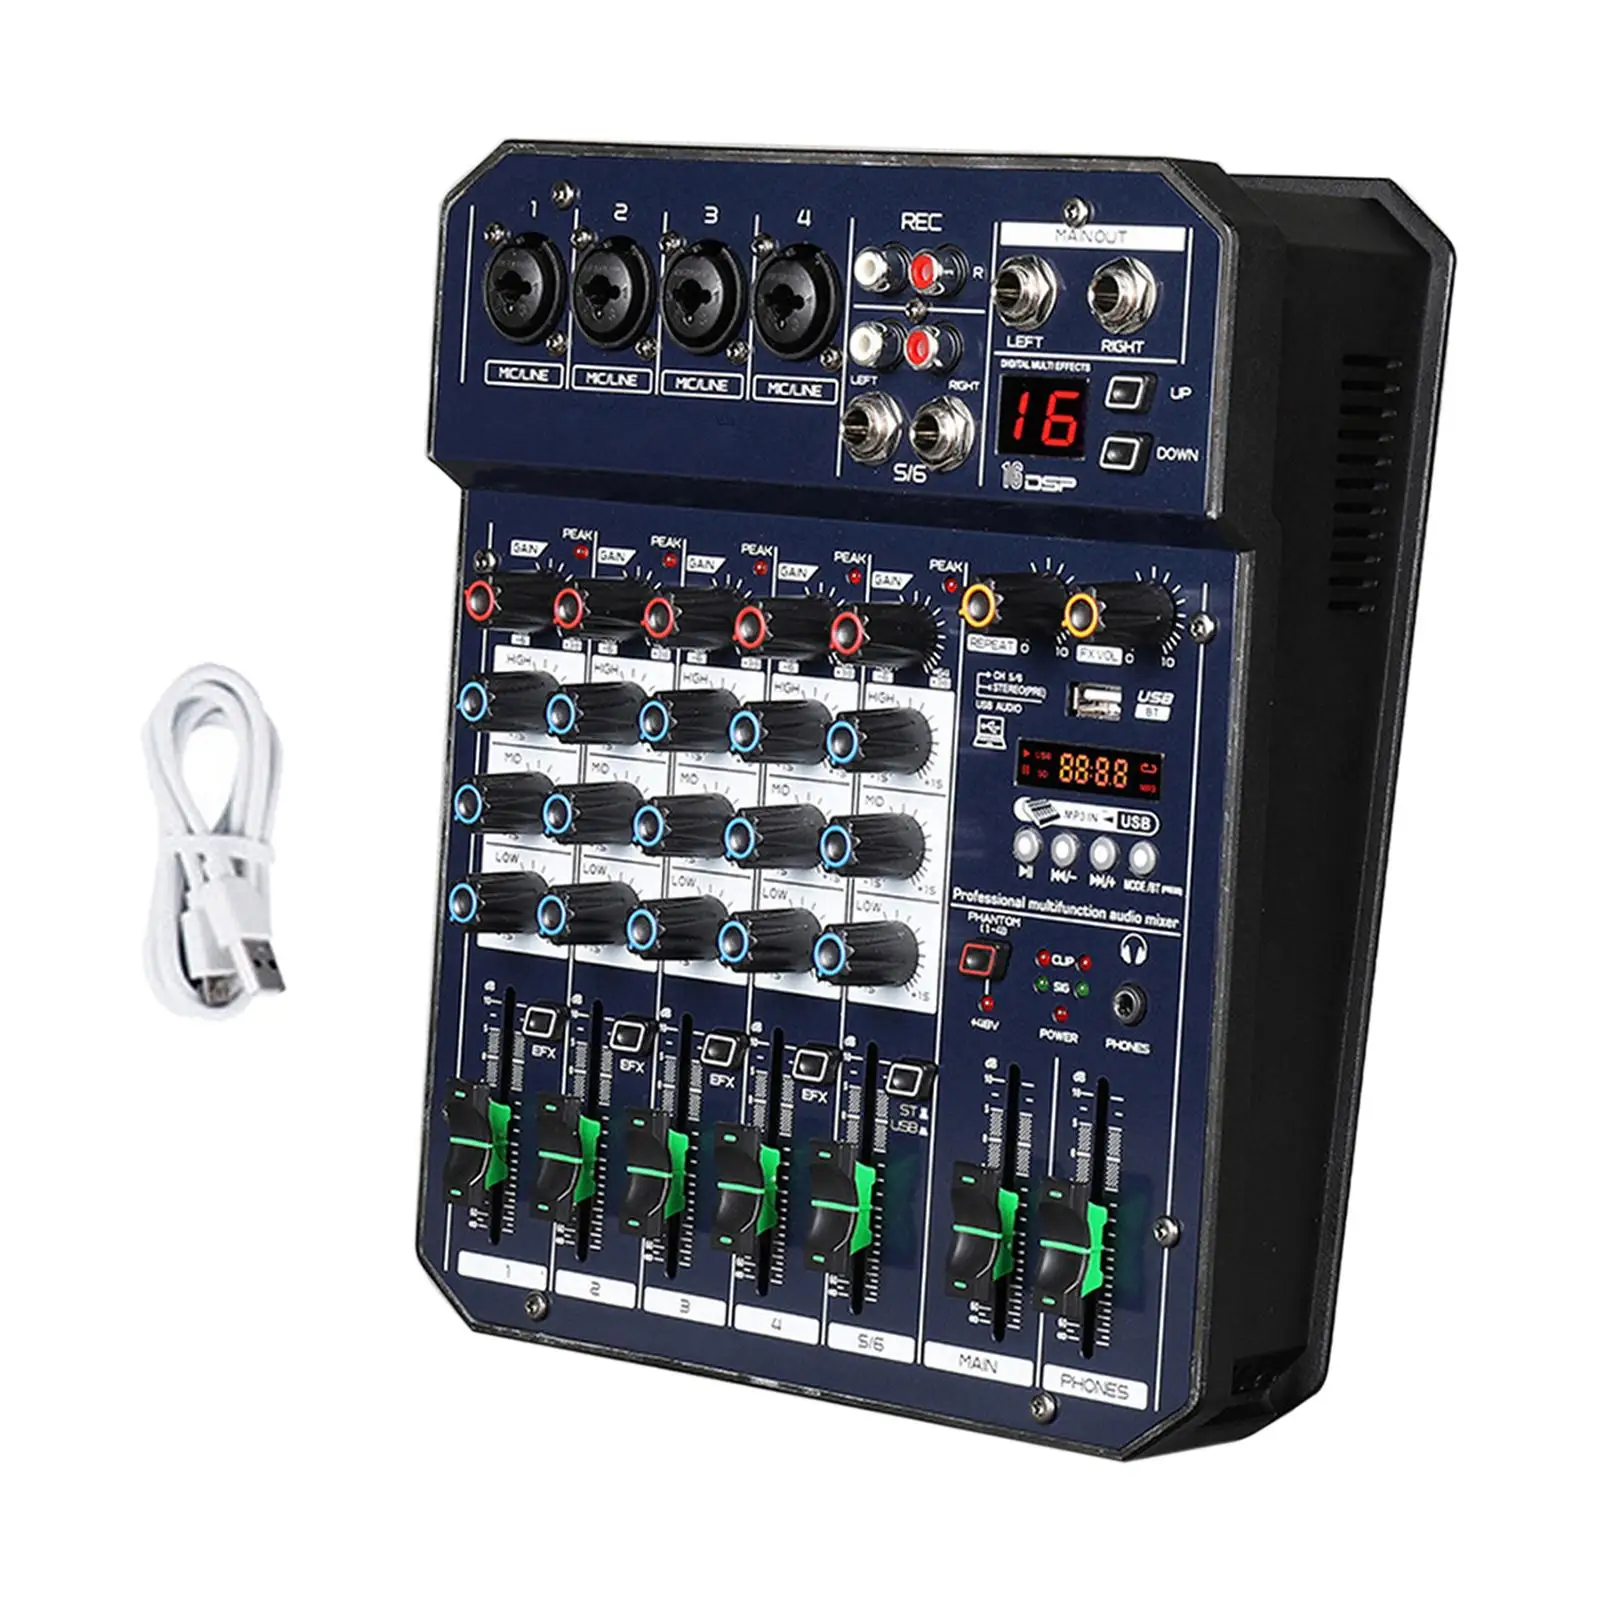 Audio Mixer Effects Mixer USB MP3 Computer Input Desk Console System US Adapter Sound Mixer Board for Podcasting Live Broadcasts